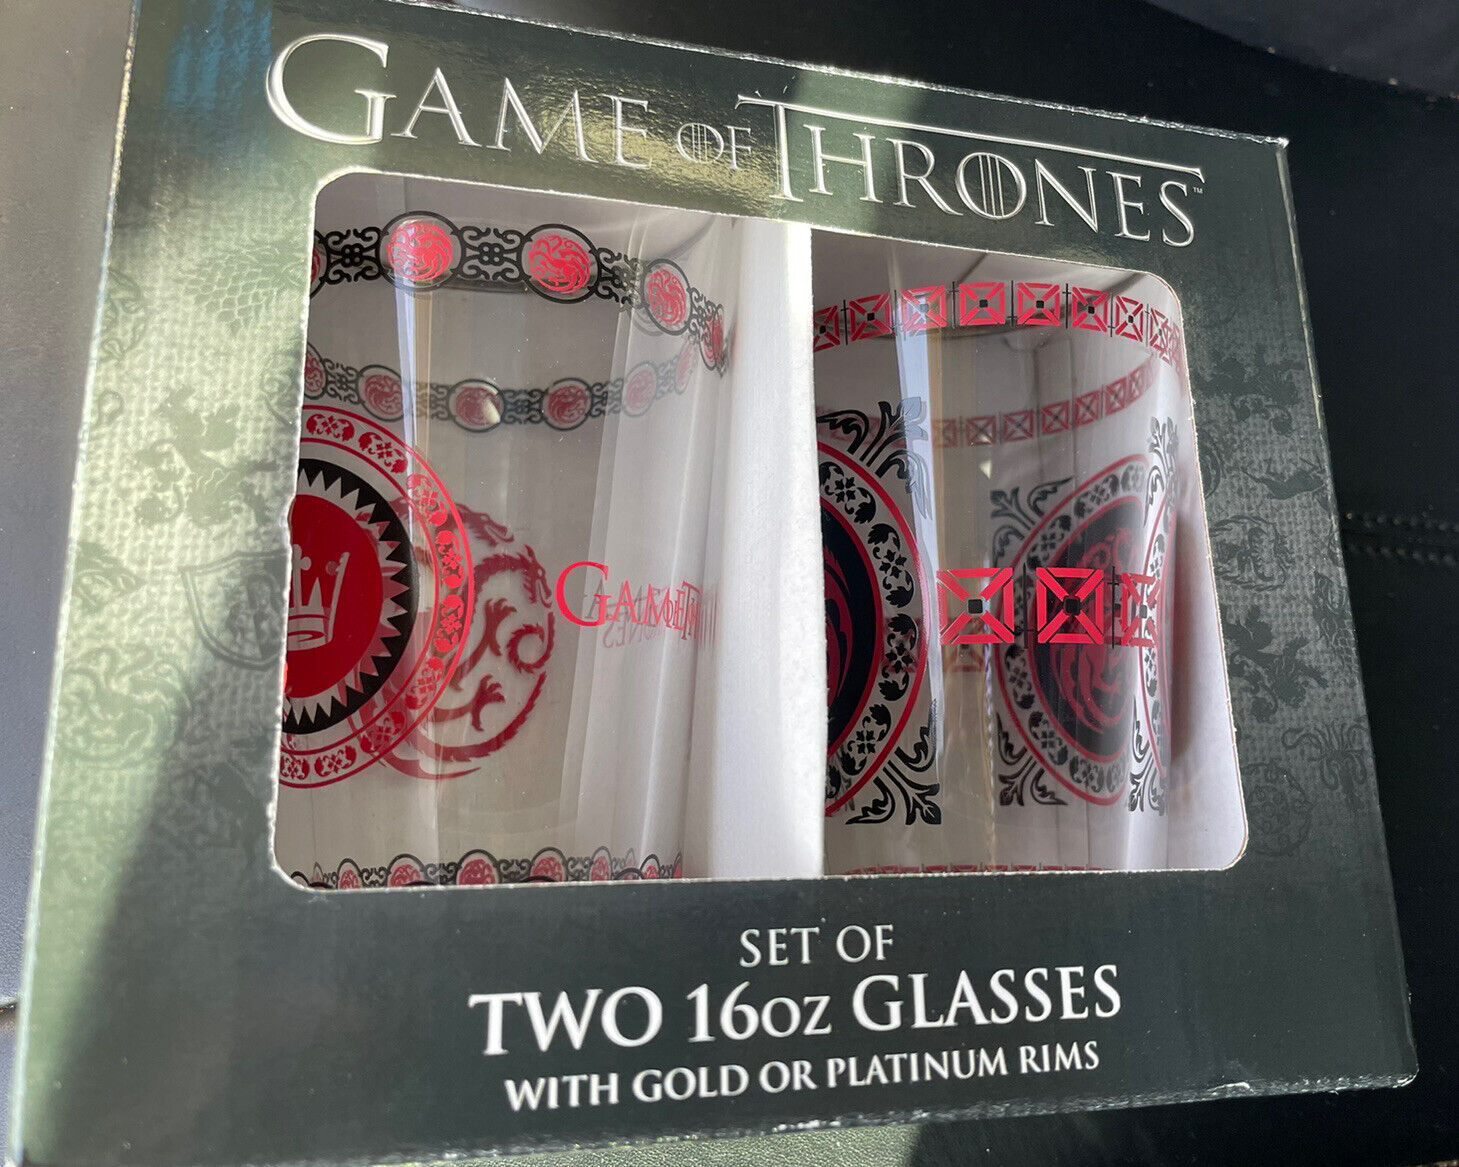 Game of Thrones Set of 2 16 oz Glasses with Platinum Rims NEW